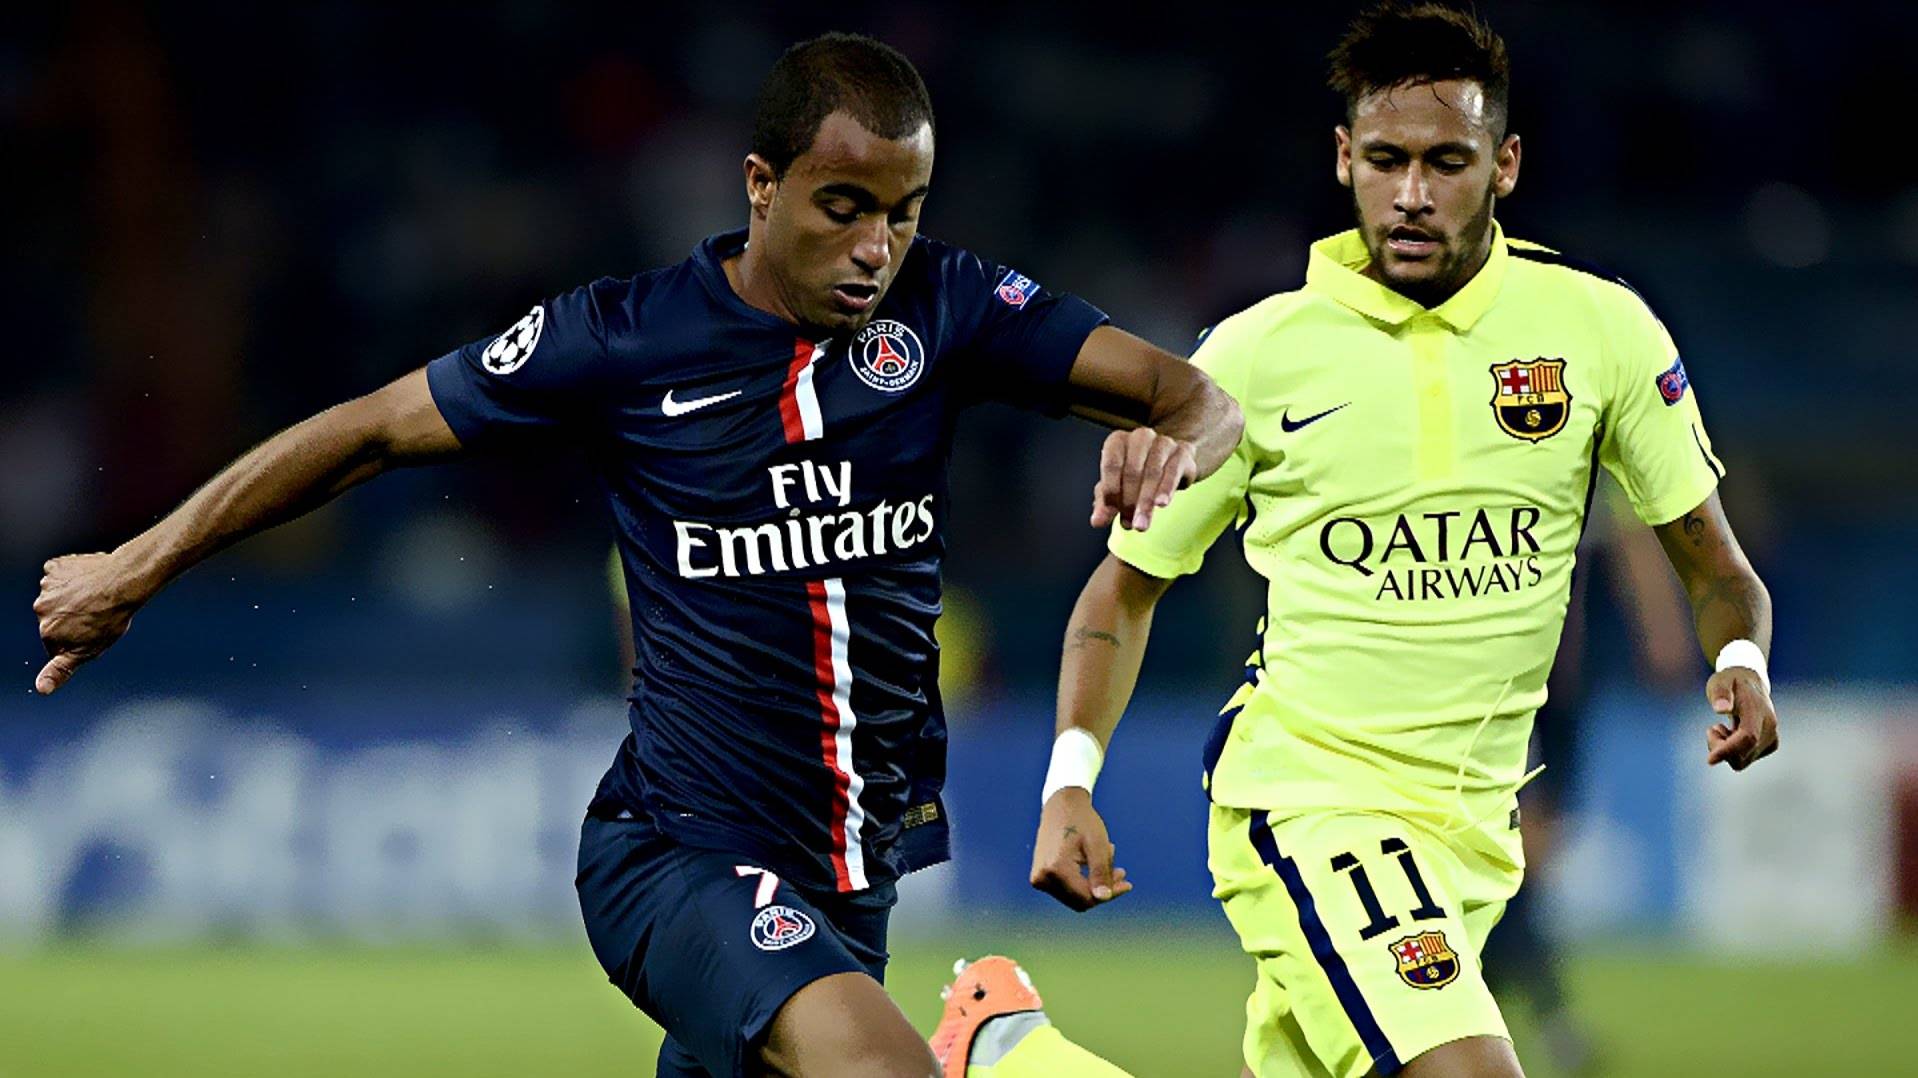 Neymar And Moura, in the PSG-Barça of the past season